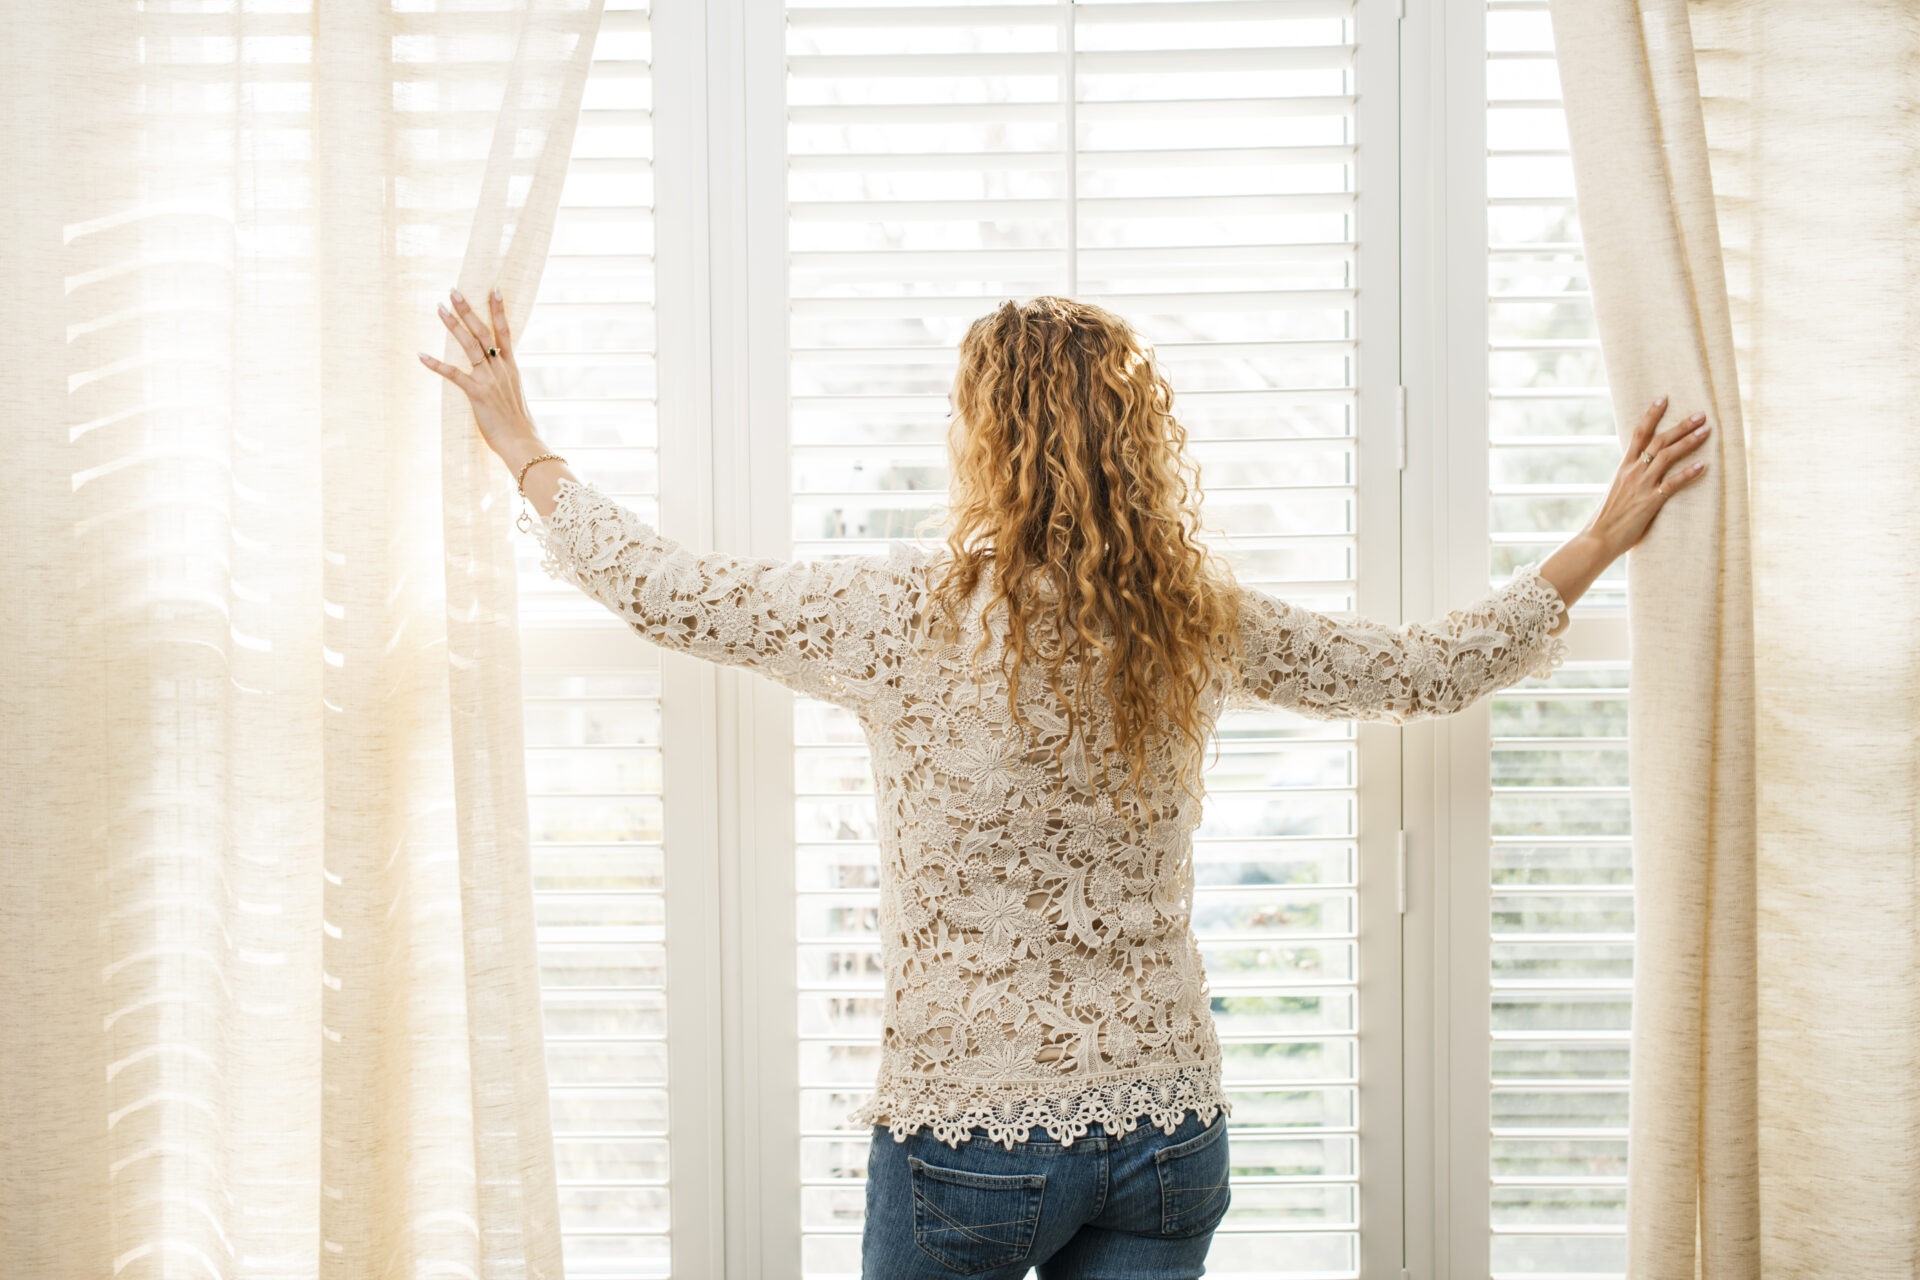 Woman looking out California blinds. Custom blinds for any size window at Wholesale Blind Factory.